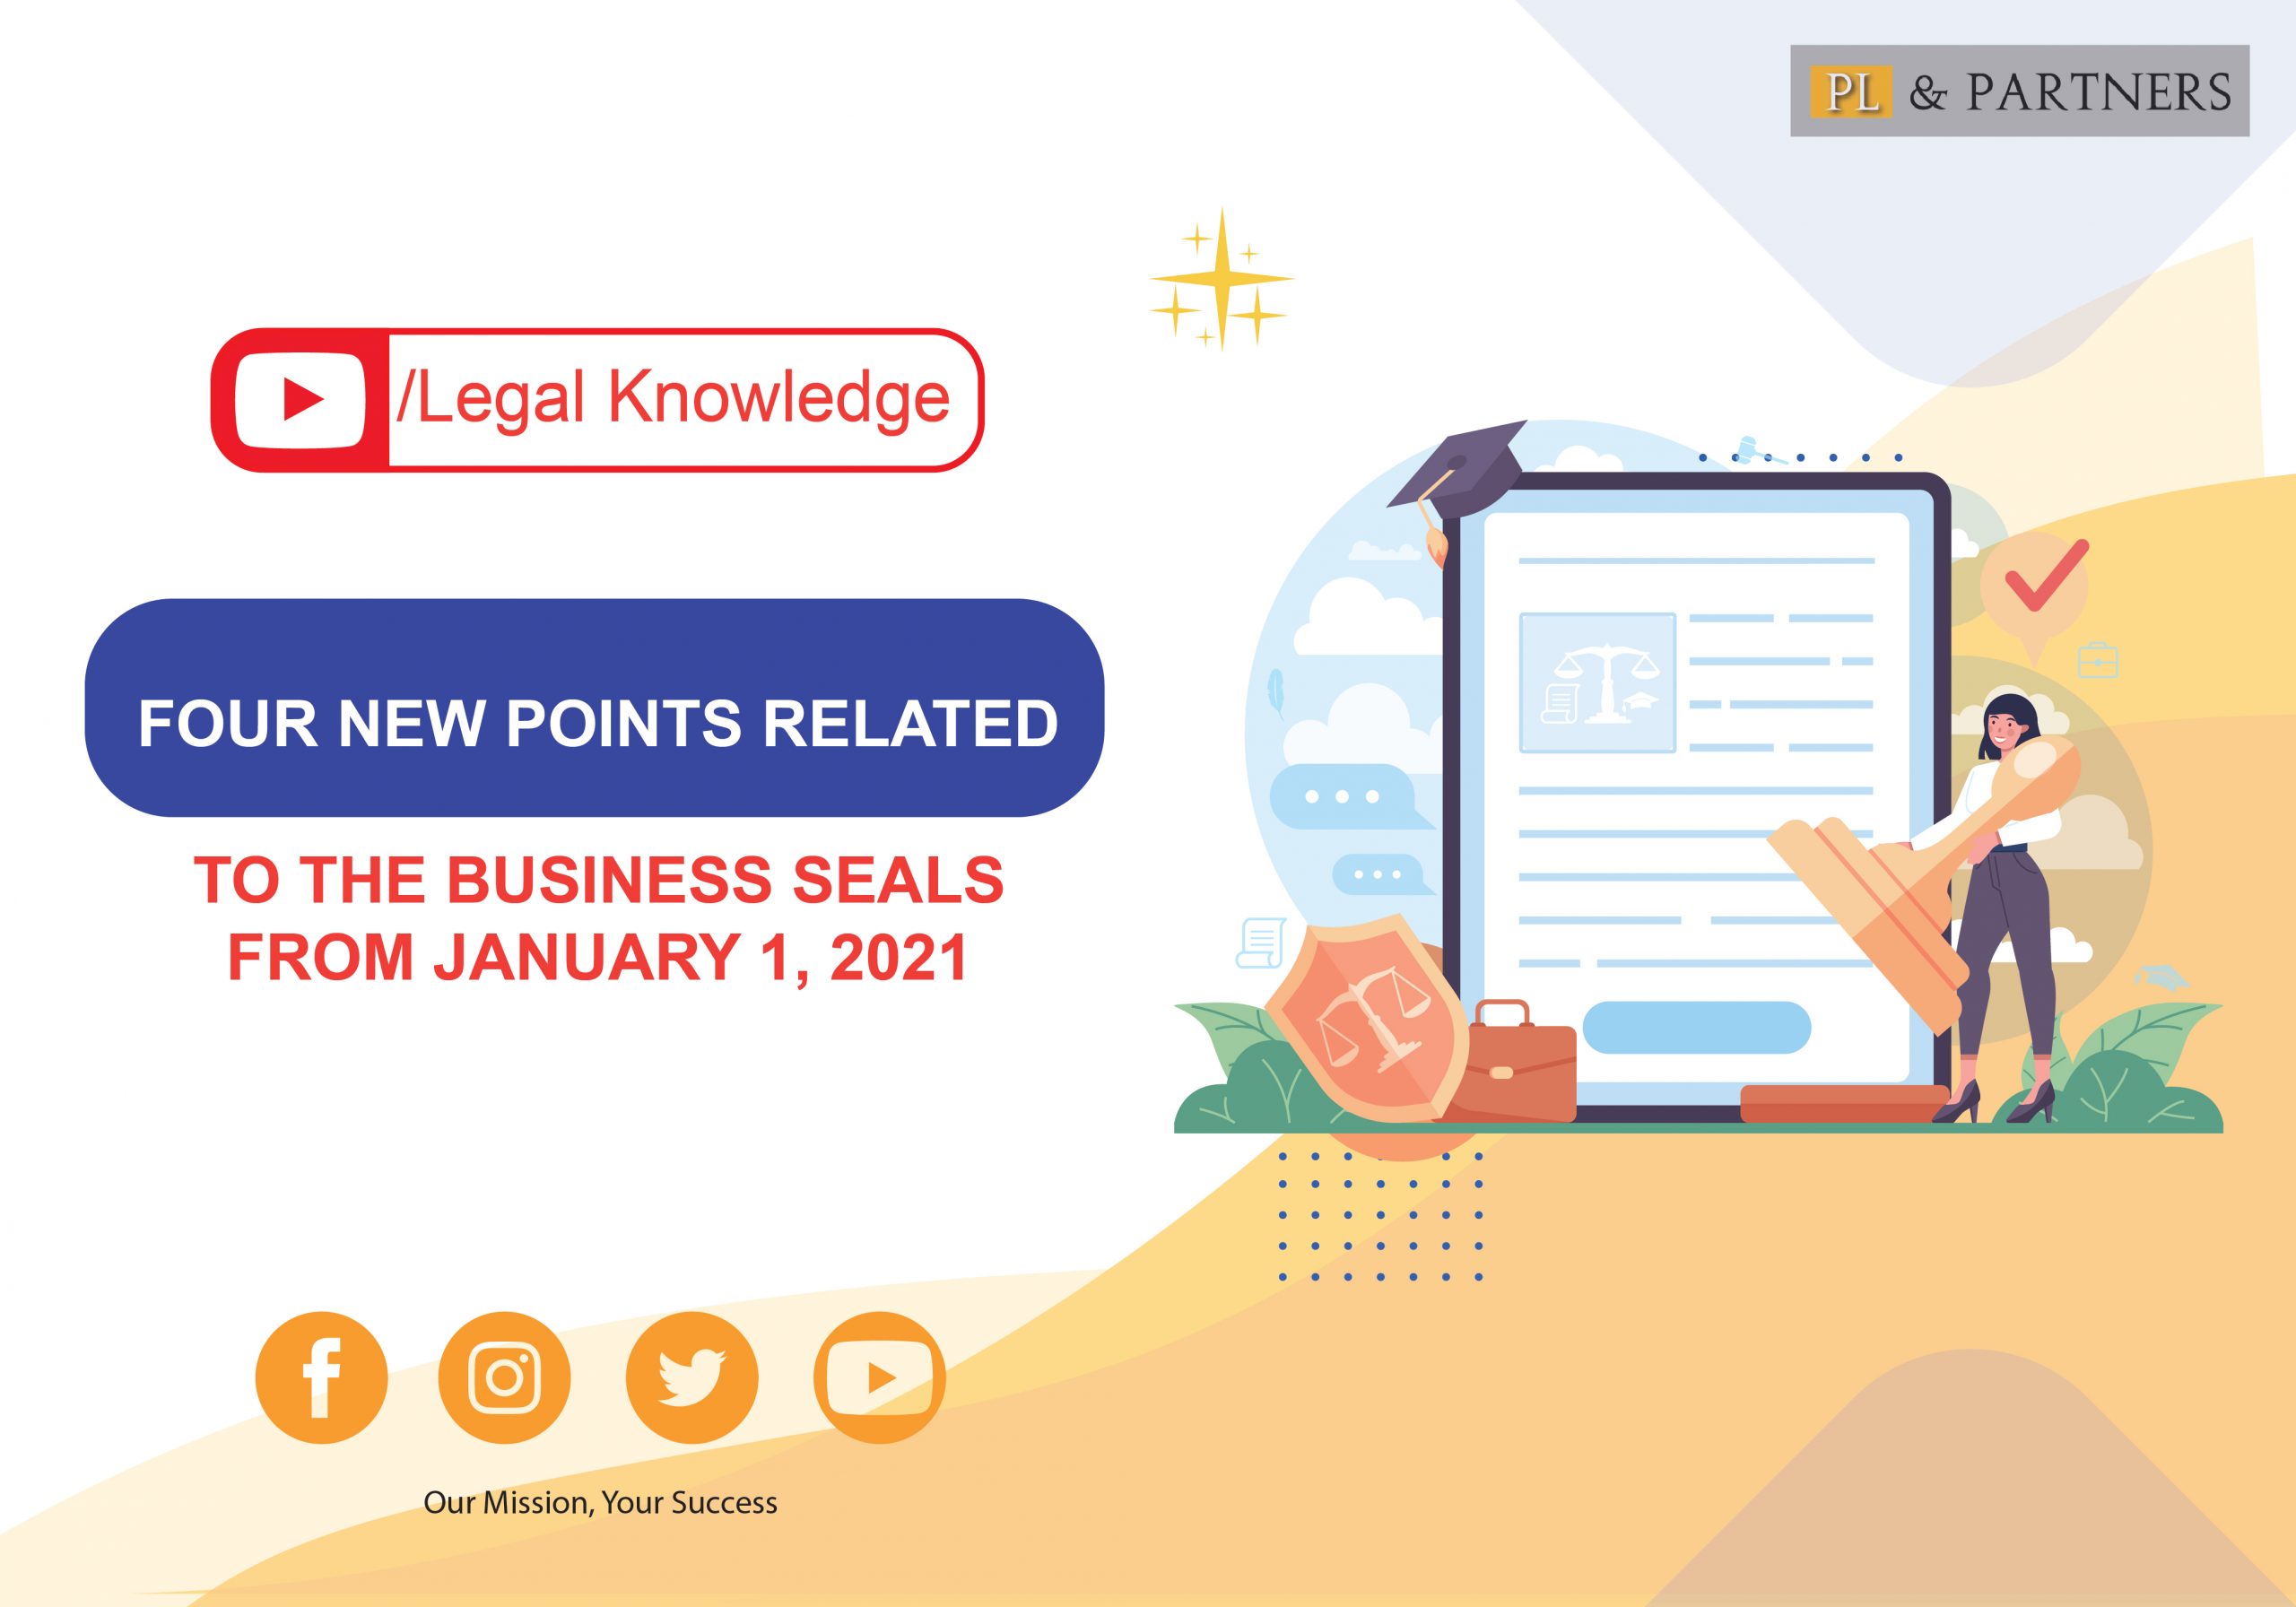 Four new points related to the business seals from 2021